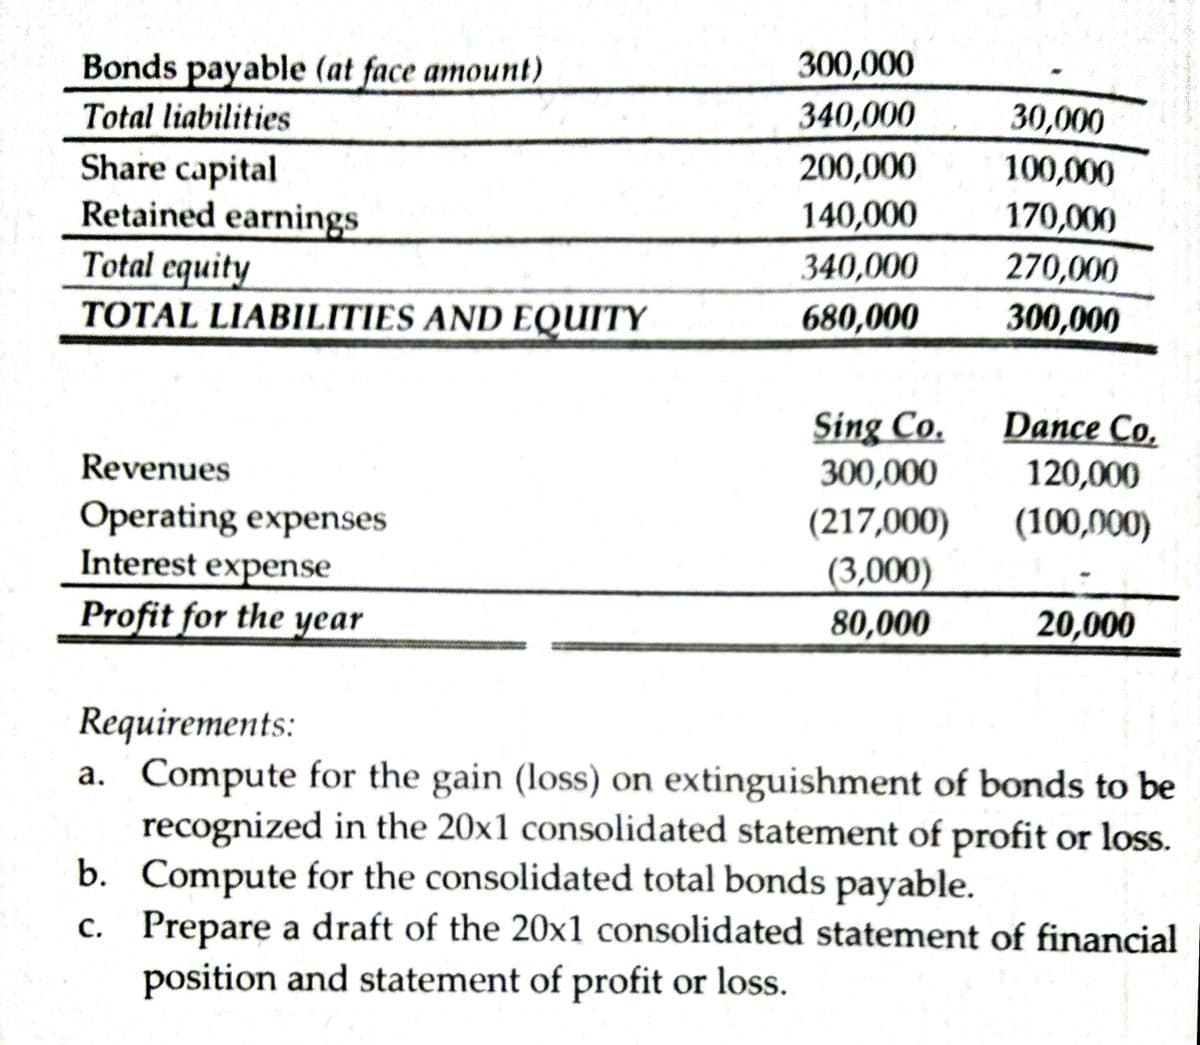 Bonds payable (at face amount)
300,000
Total liabilities
340,000
30,000
Share capital
Retained earnings
Total equity
200,000
100,000
140,000
170,000
340,000
270,000
TOTAL LIABILITIES AND EQUITY
680,000
300,000
Sing Co.
300,000
Dance Co.
Revenues
120,000
Operating expenses
Interest expense
(217,000)
(100,000)
(3,000)
Profit for the year
80,000
20,000
Requirements:
a. Compute for the gain (loss) on extinguishment of bonds to be
recognized in the 20x1 consolidated statement of profit or loss.
b. Compute for the consolidated total bonds payable.
c. Prepare a draft of the 20x1 consolidated statement of financial
position and statement of profit or loss.
